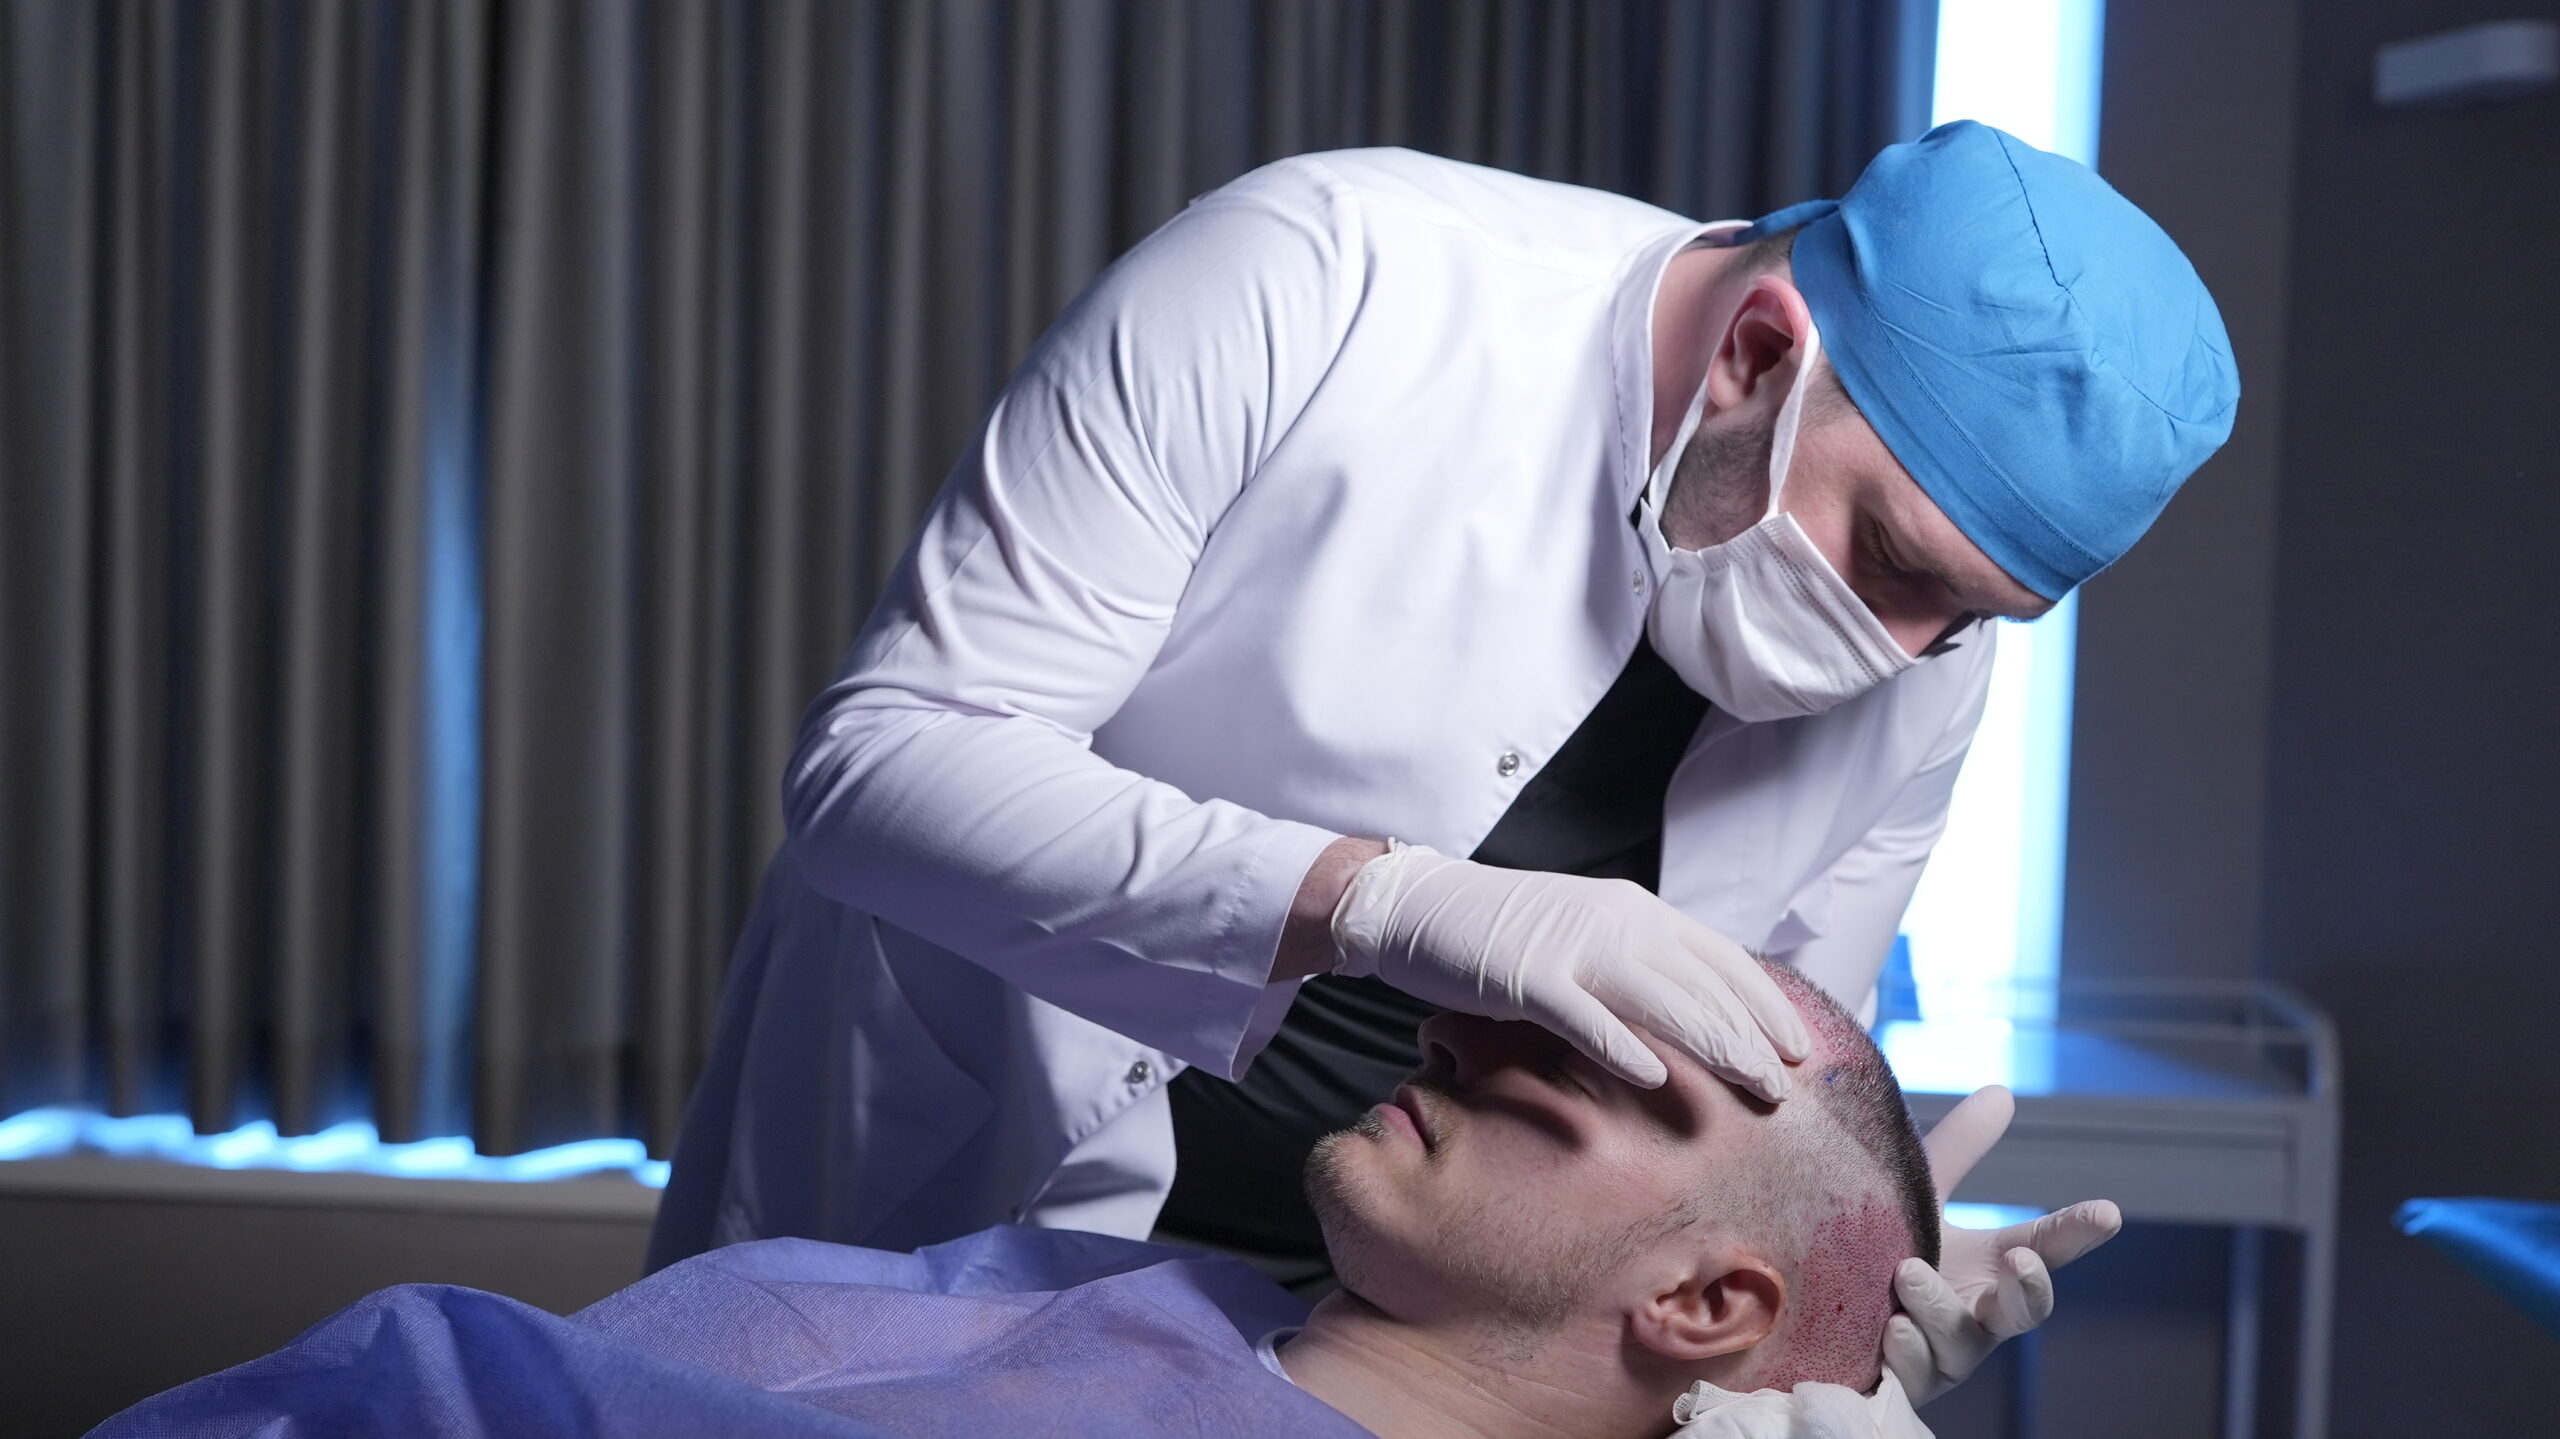 Hair transplant surgeon with patient during operation